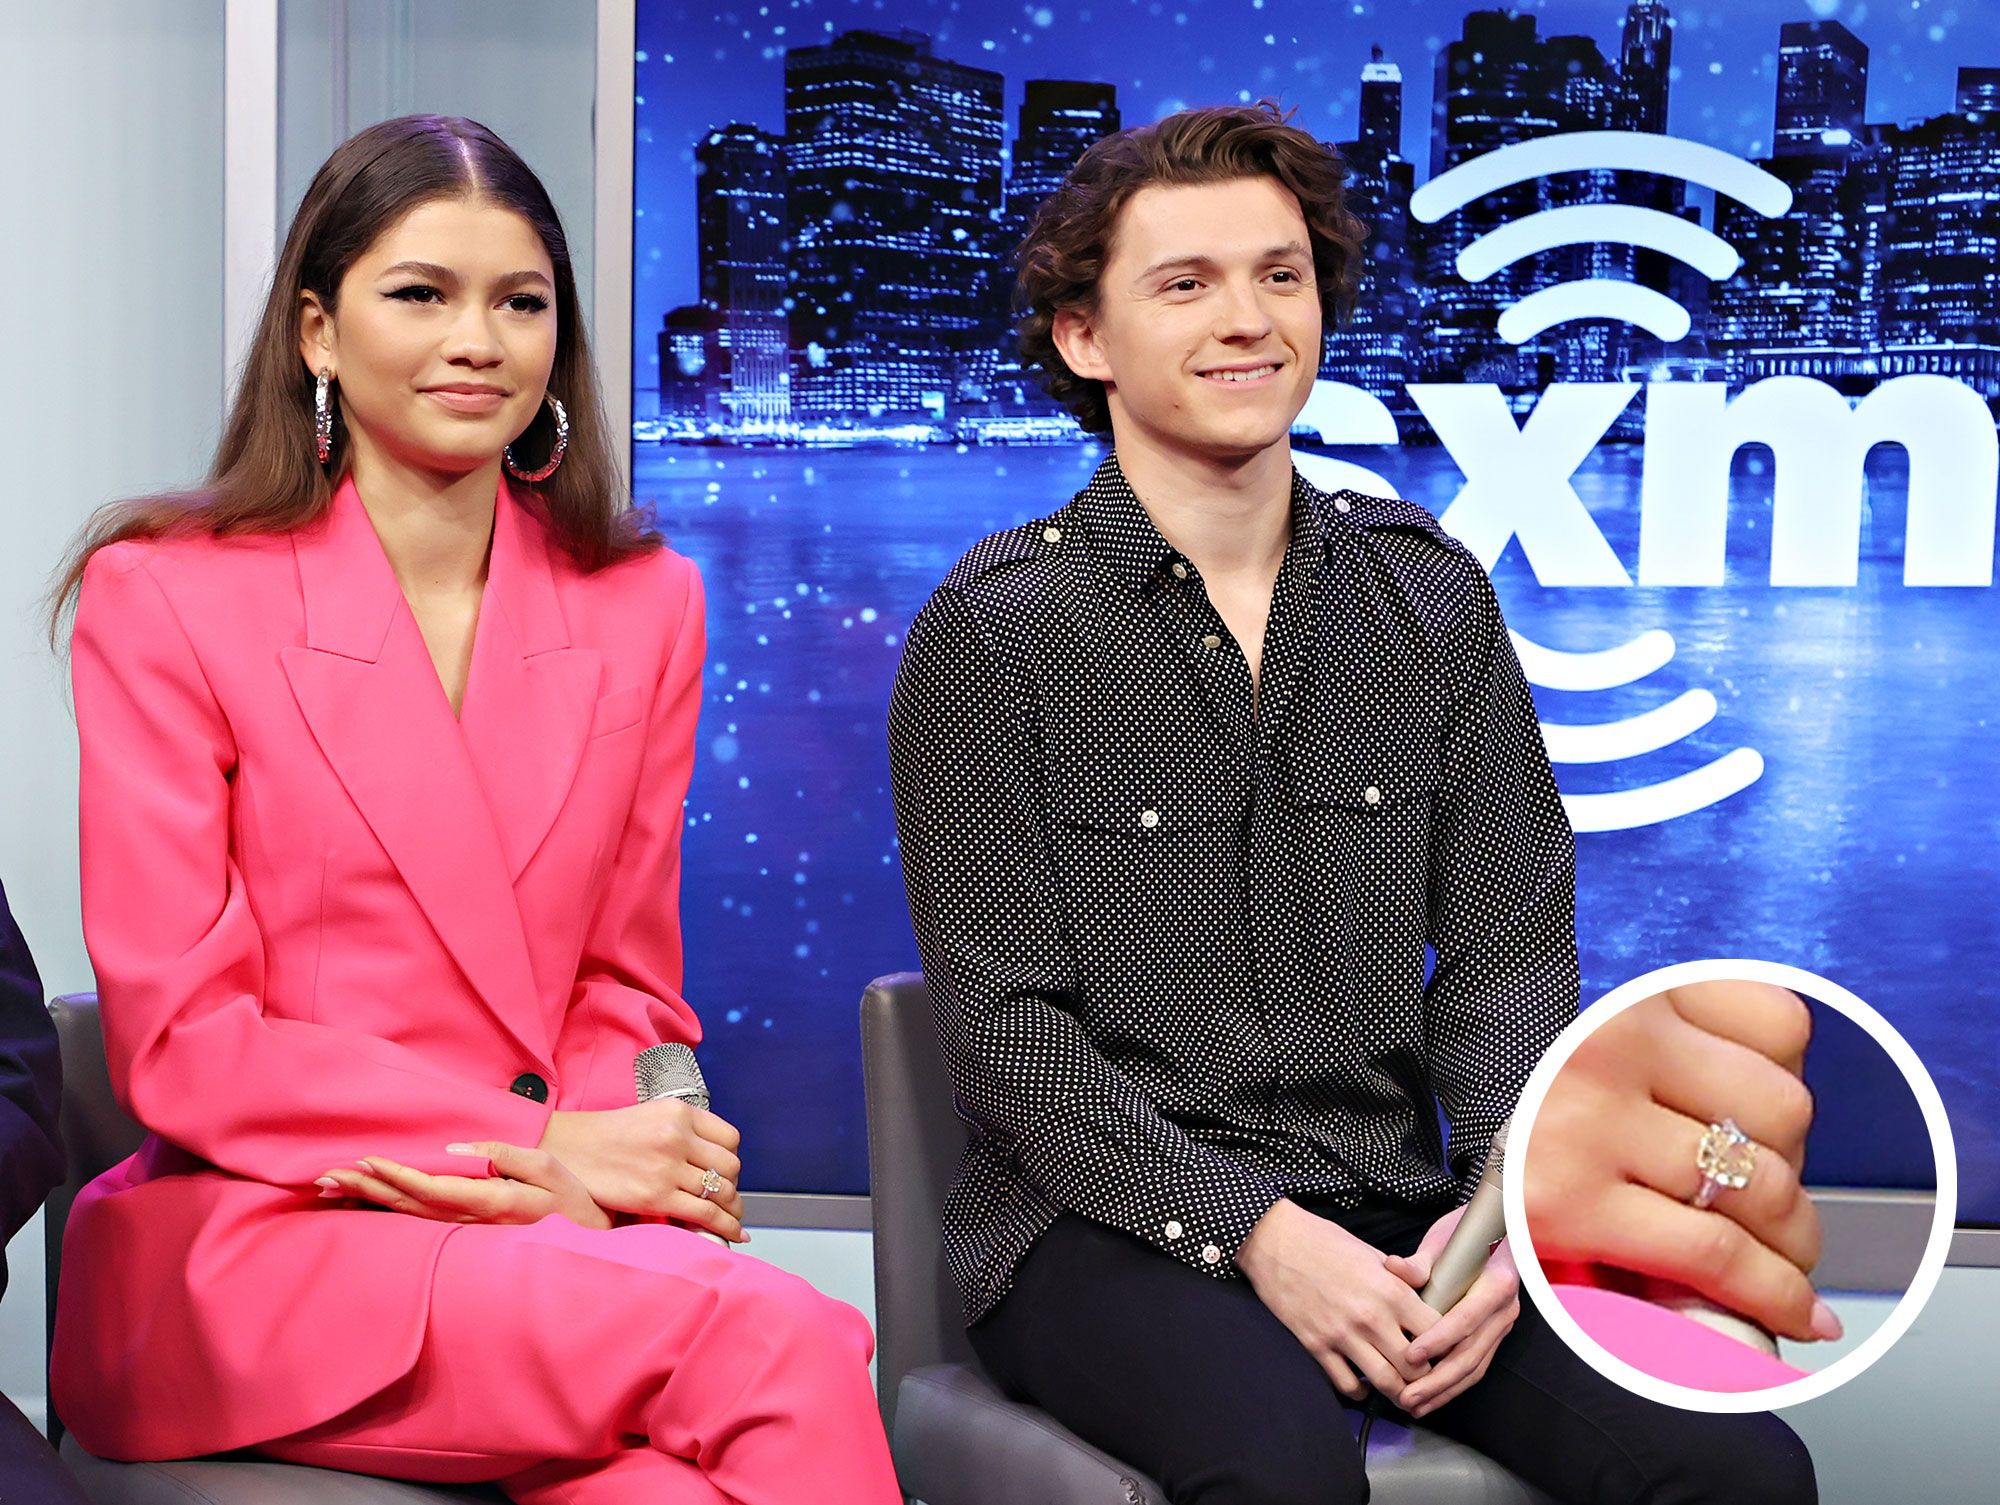 Are Zendaya and Tom Holland Engaged? - Diamond Ring and Hair Trans Photo  Explained